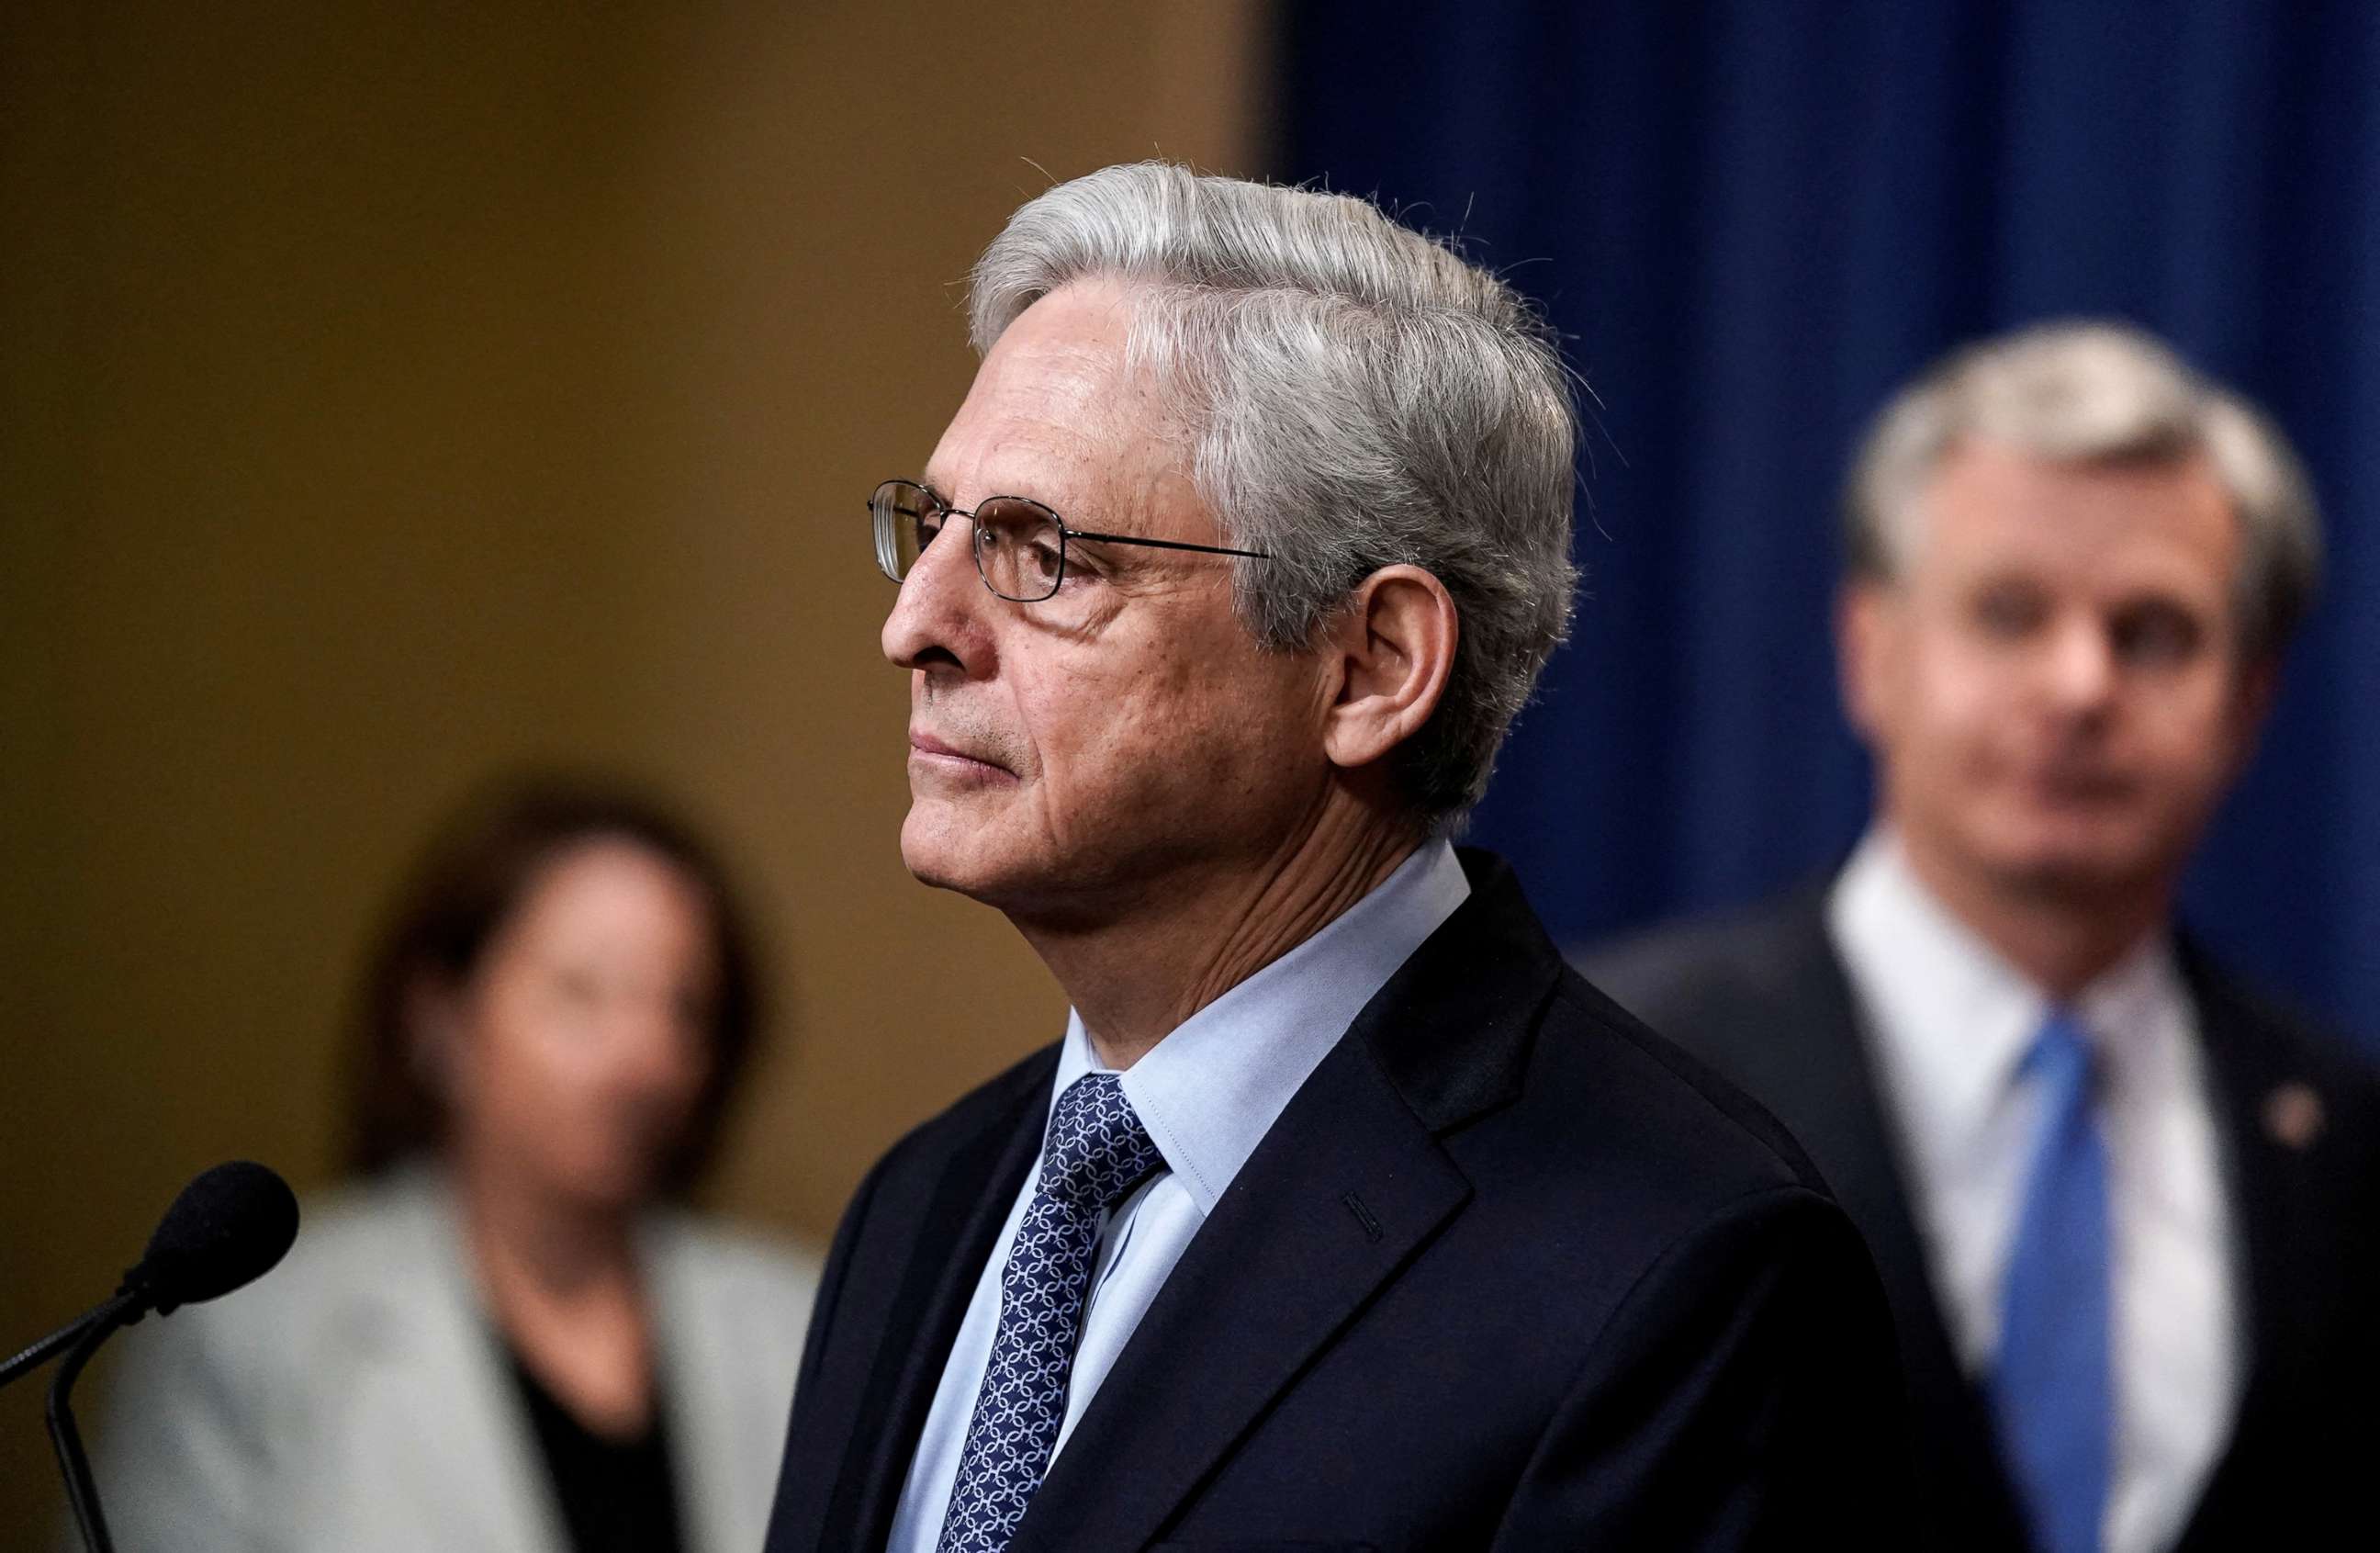 PHOTO: Attorney General Merrick Garland is flanked by Deputy Attorney General Lisa Monaco and FBI Director Christopher Wray, during a news conference at the Justice Department in Washington, D.C., April 6, 2022.